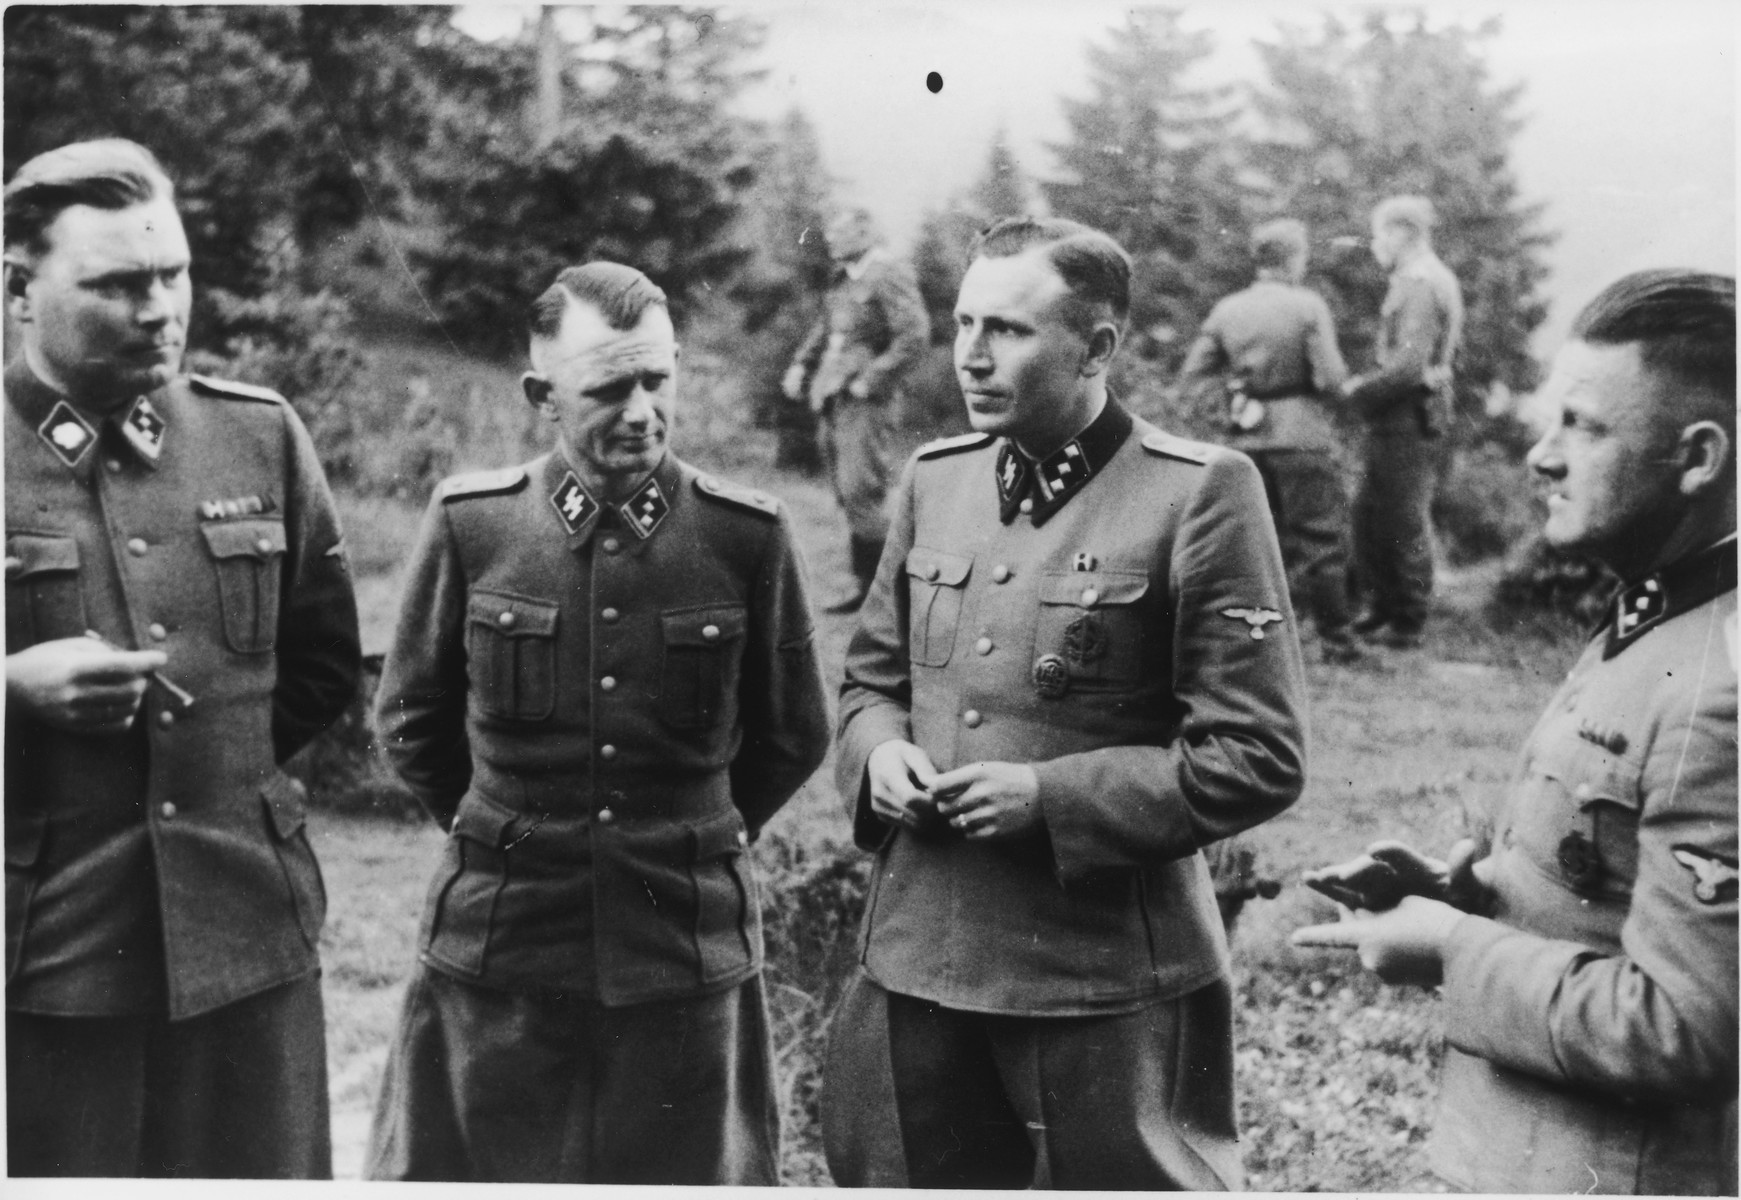 SS officers socialize on the grounds of the SS retreat Solahuette outside of Auschwitz. 

From left to right they are: Josef Kramer, Anton Thumann, Karl Hoecker and Franz Hoessler. 

[Based on the officers visiting Solahutte, we surmise that the photographs were taken to honor Rudolf Hoess who completed his tenure as garrison senior on July 29.]